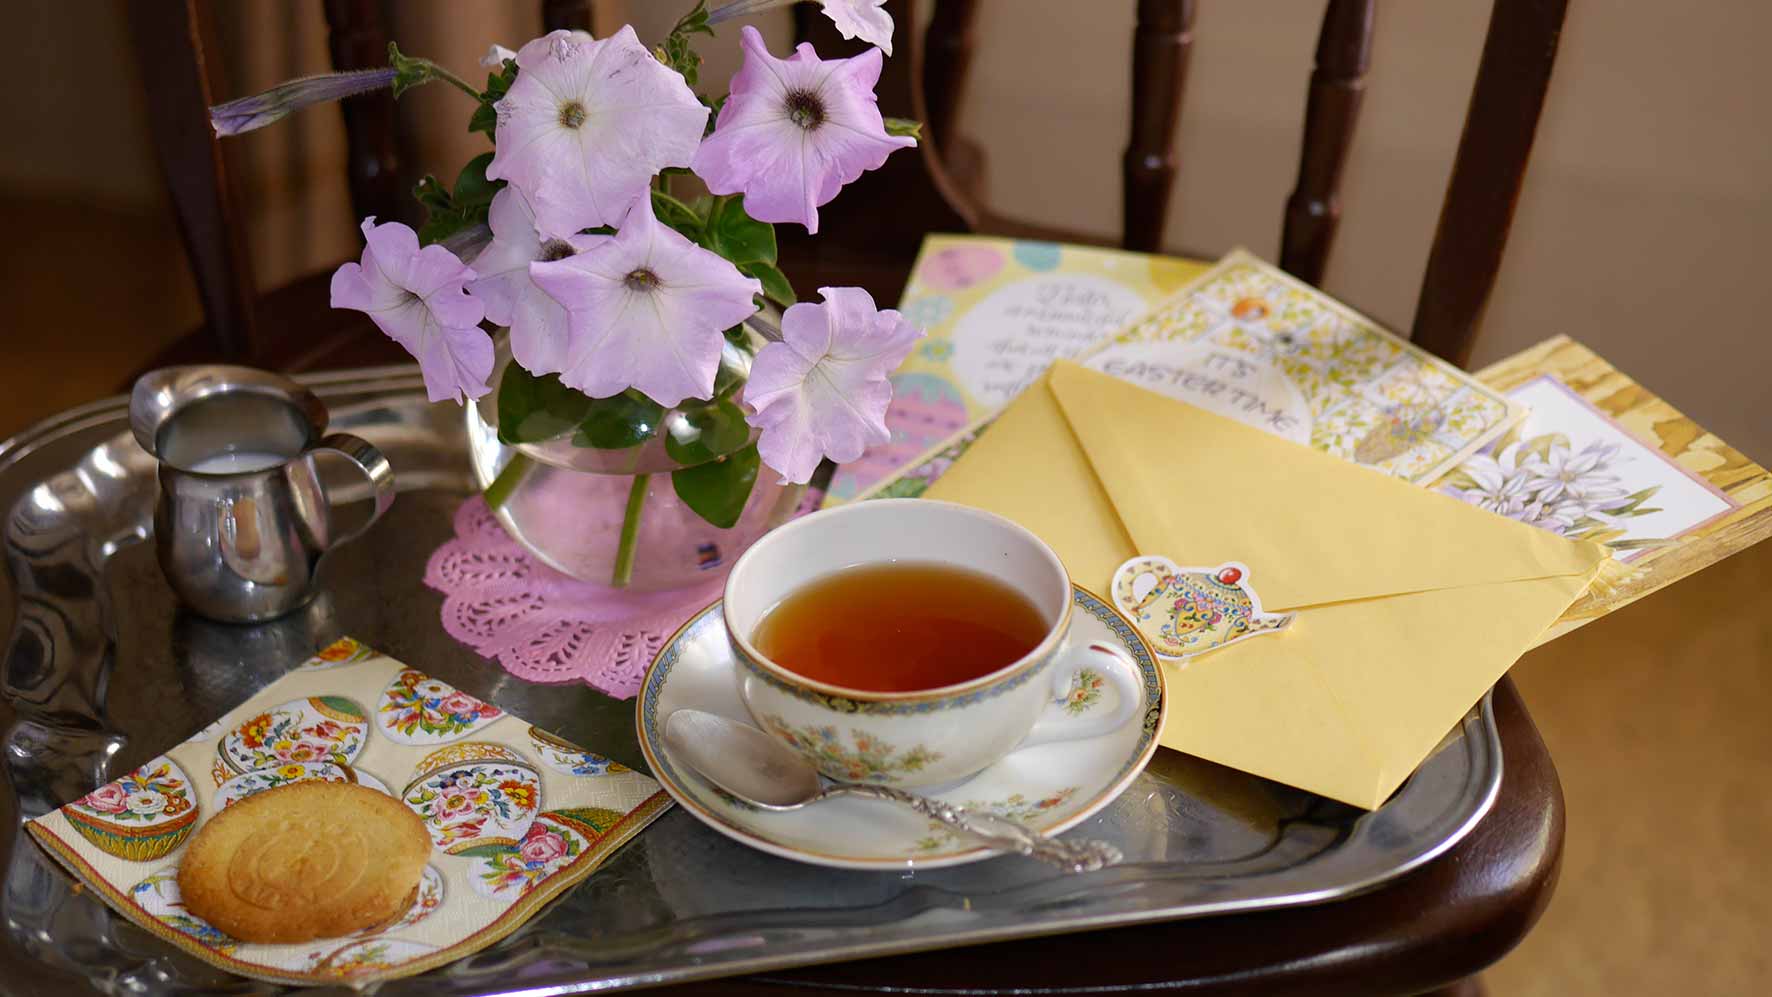 Tea tray with Easter themed napkins, tea, flowers and Easter greeting cards.